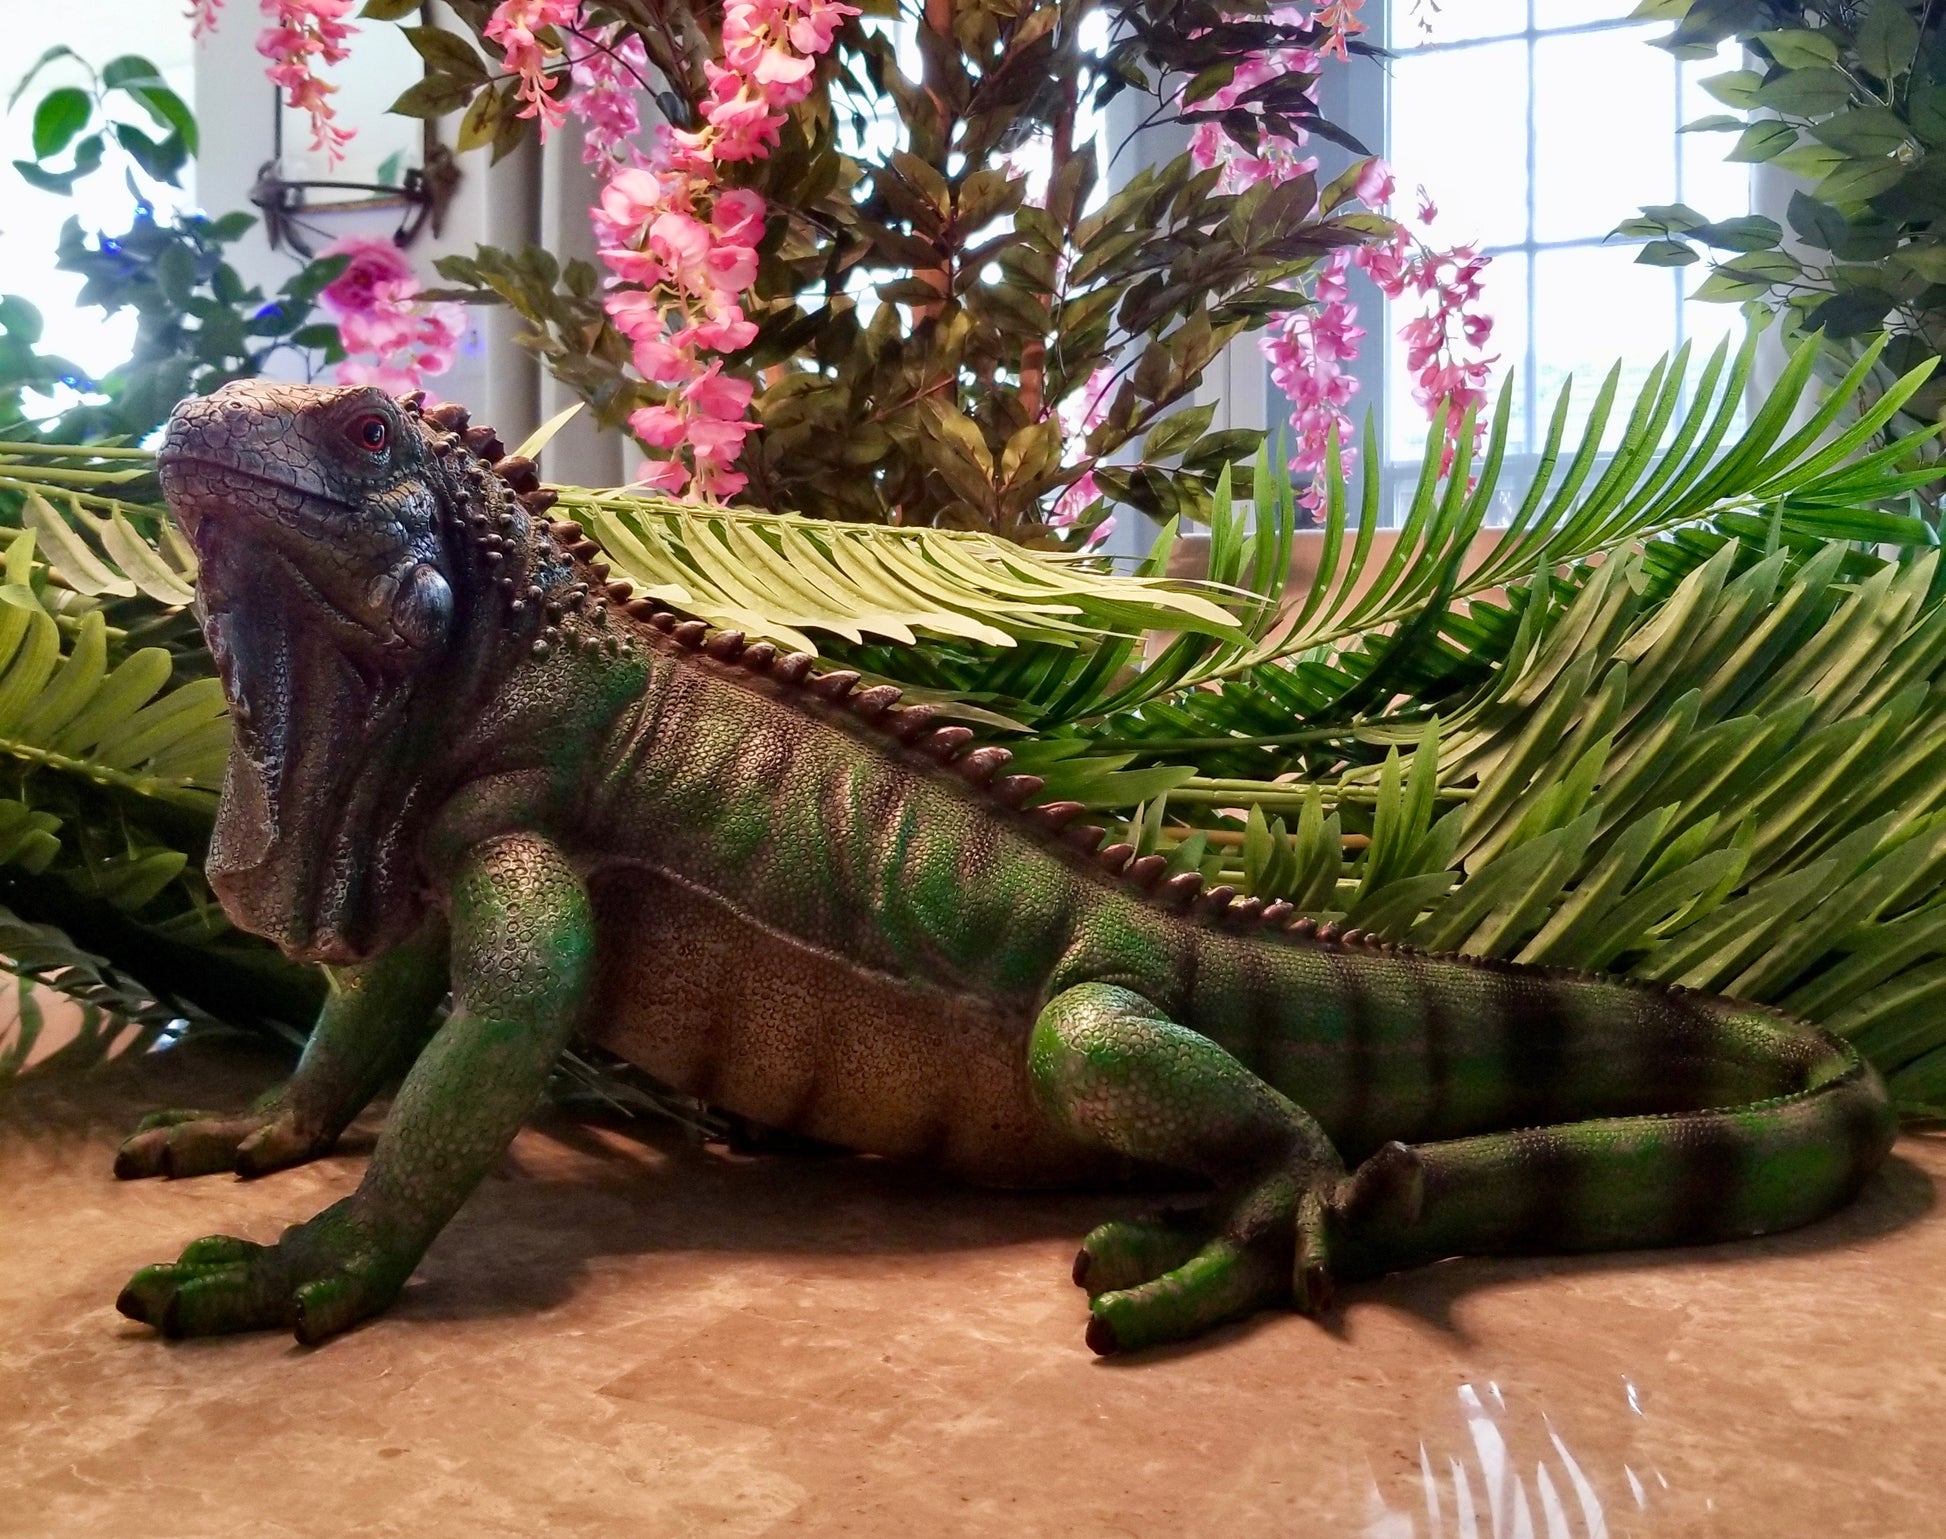 buy an iguana statue at auction